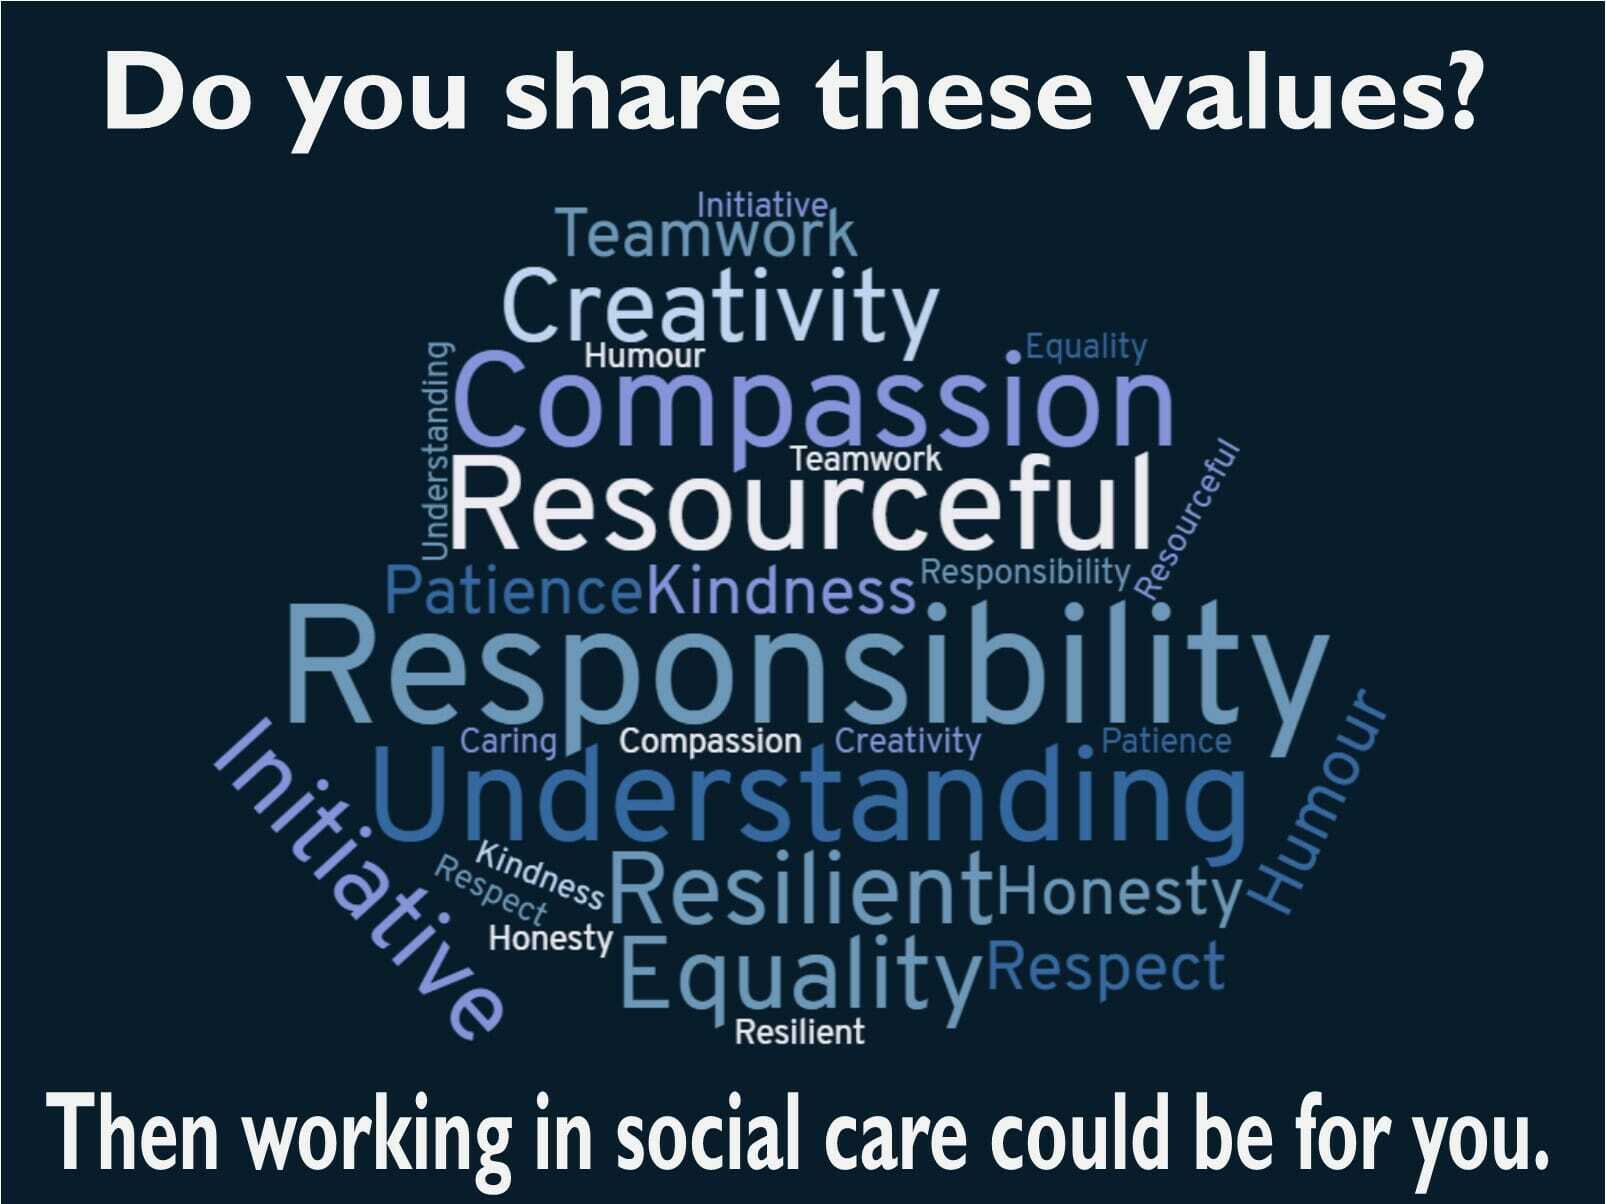 Word cloud of the values people have working in care.